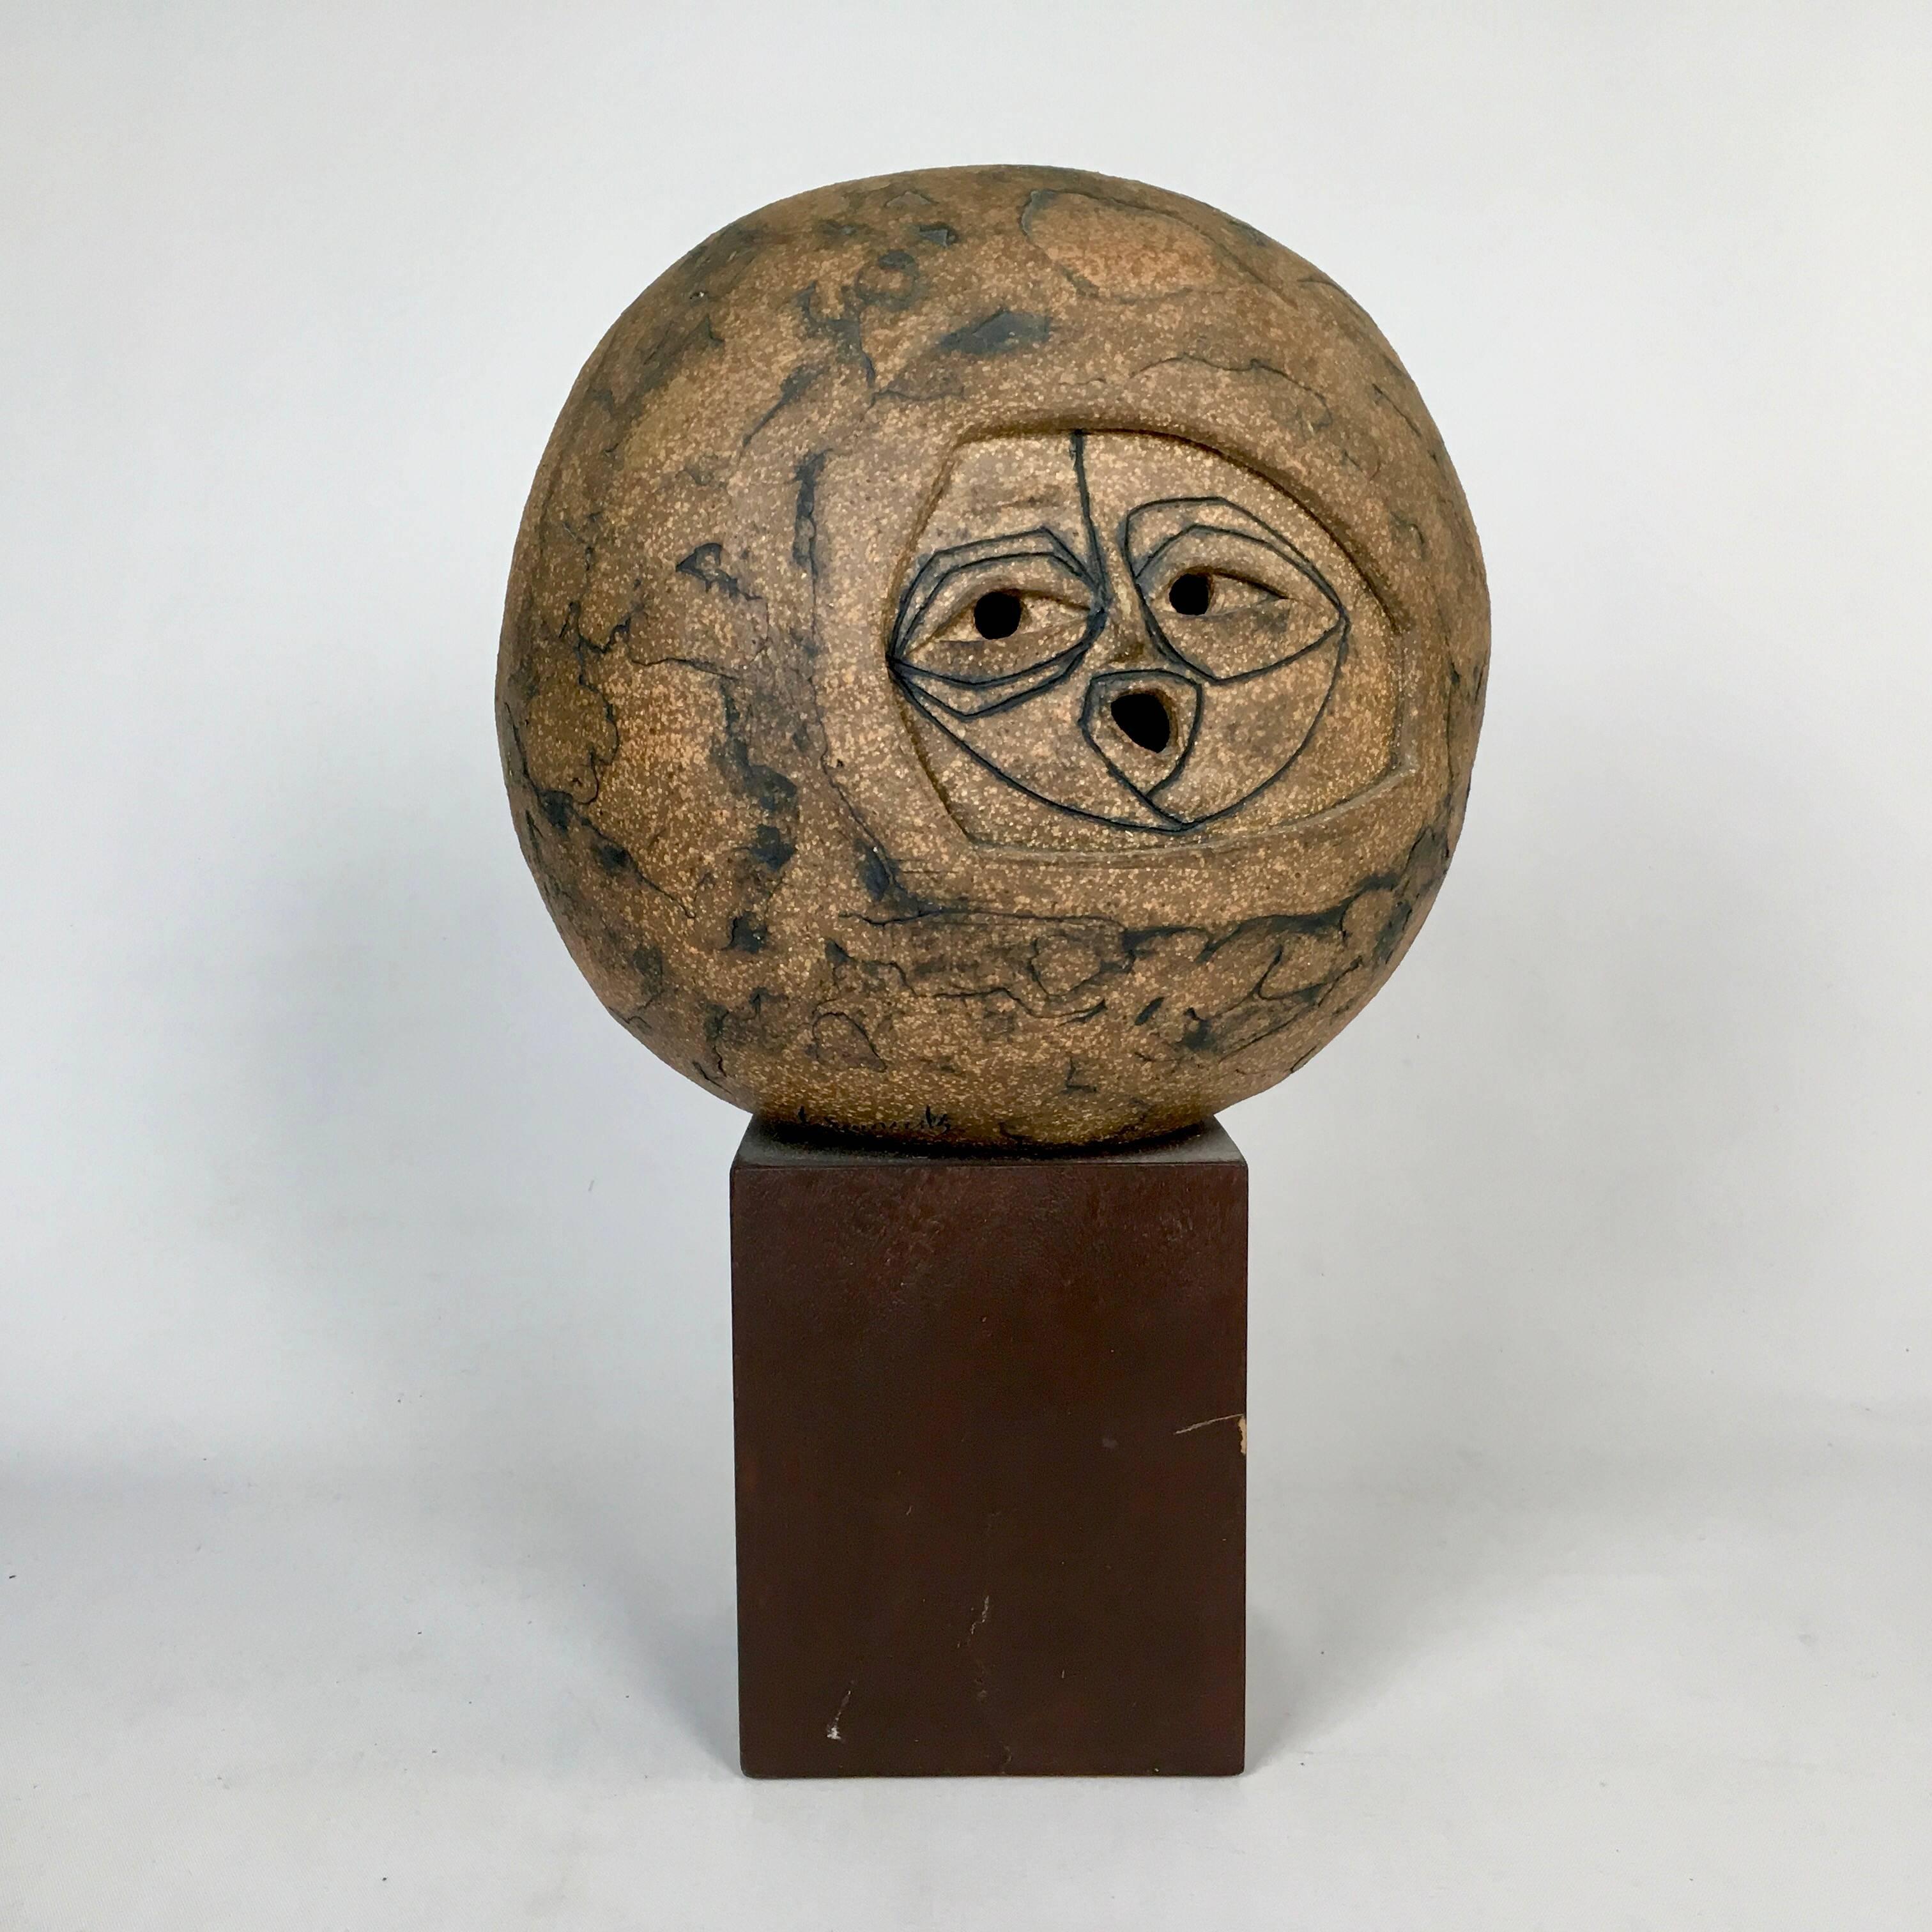 Rare abstract modern large stoneware pottery sculpture circa 1960s. Solid walnut square base. The Pottery is signed EDWARDS. 
 
Joel Edwards studied under Peter Voulkos at Otis College of Art & Design in 1954. Joel Edwards works are in the